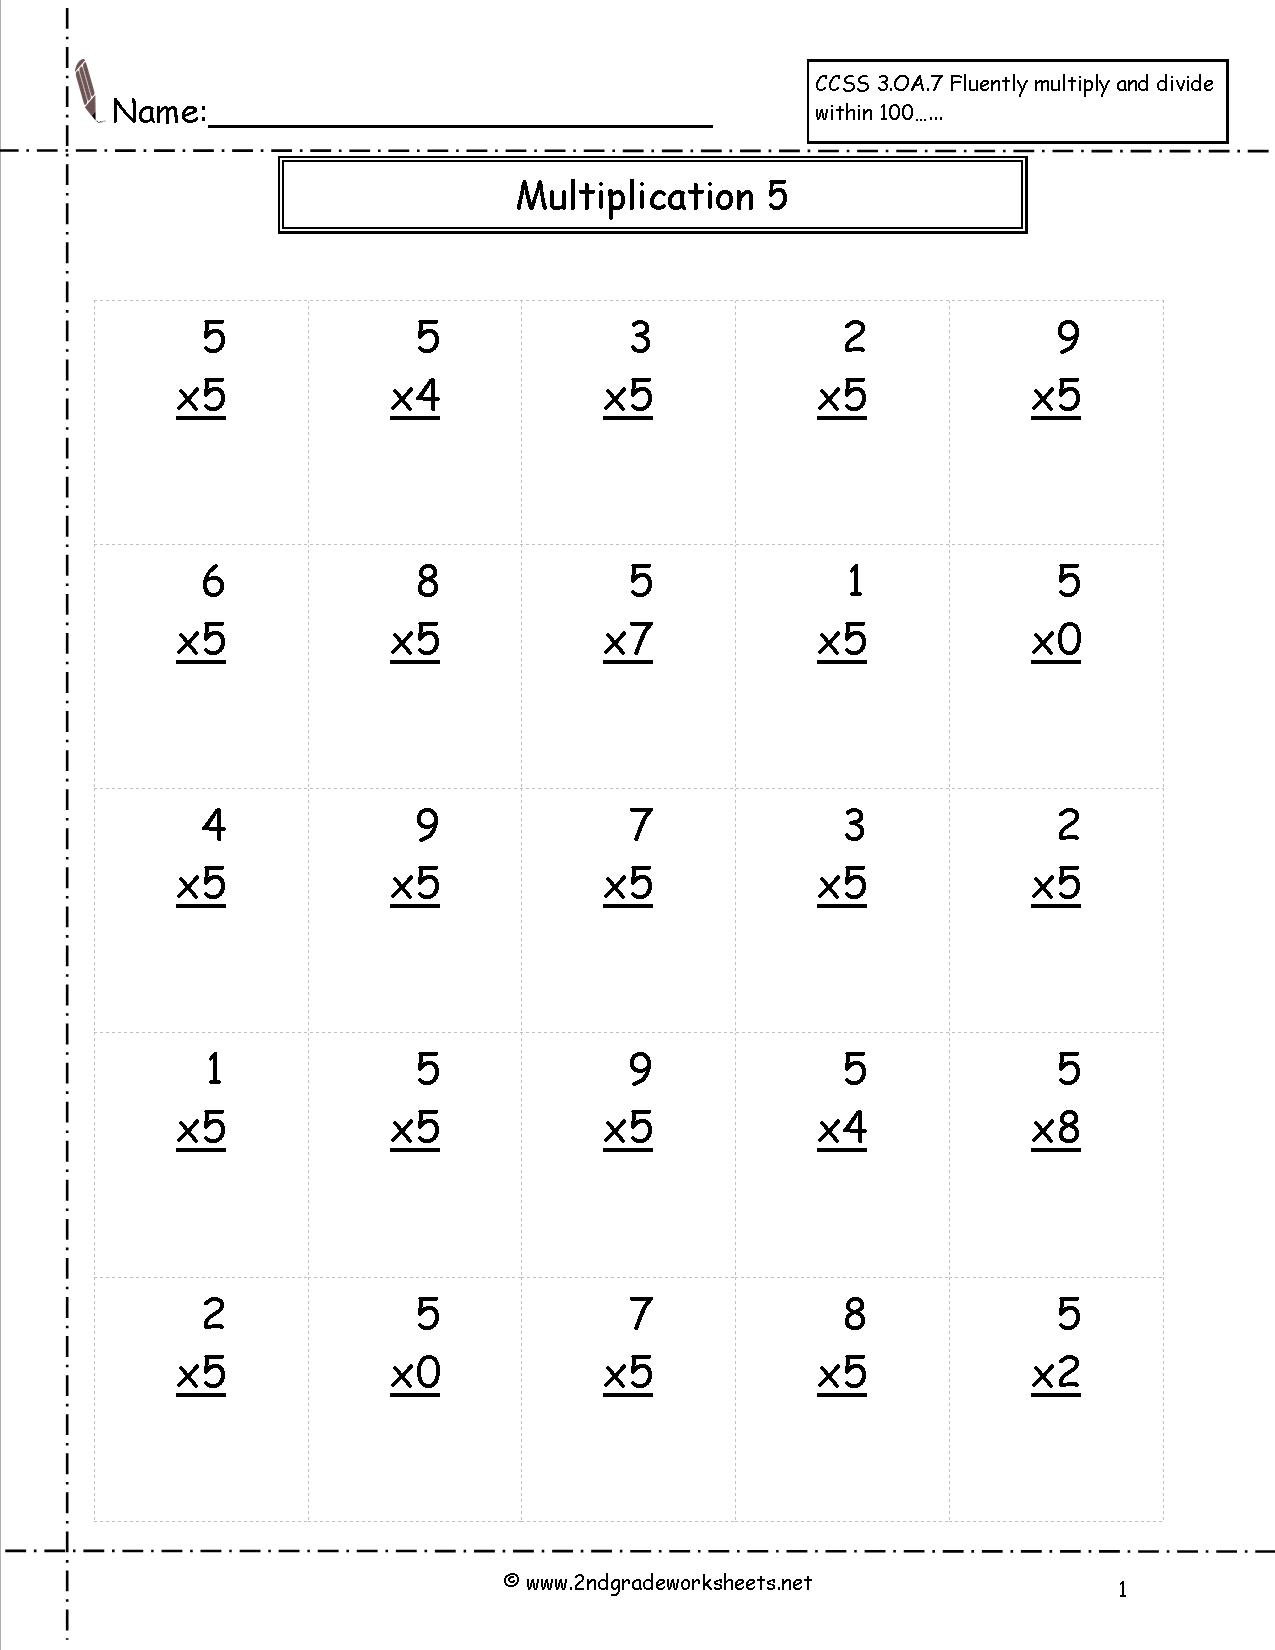 Multiplication Worksheets And Printouts for 5 Multiplication Worksheets Free